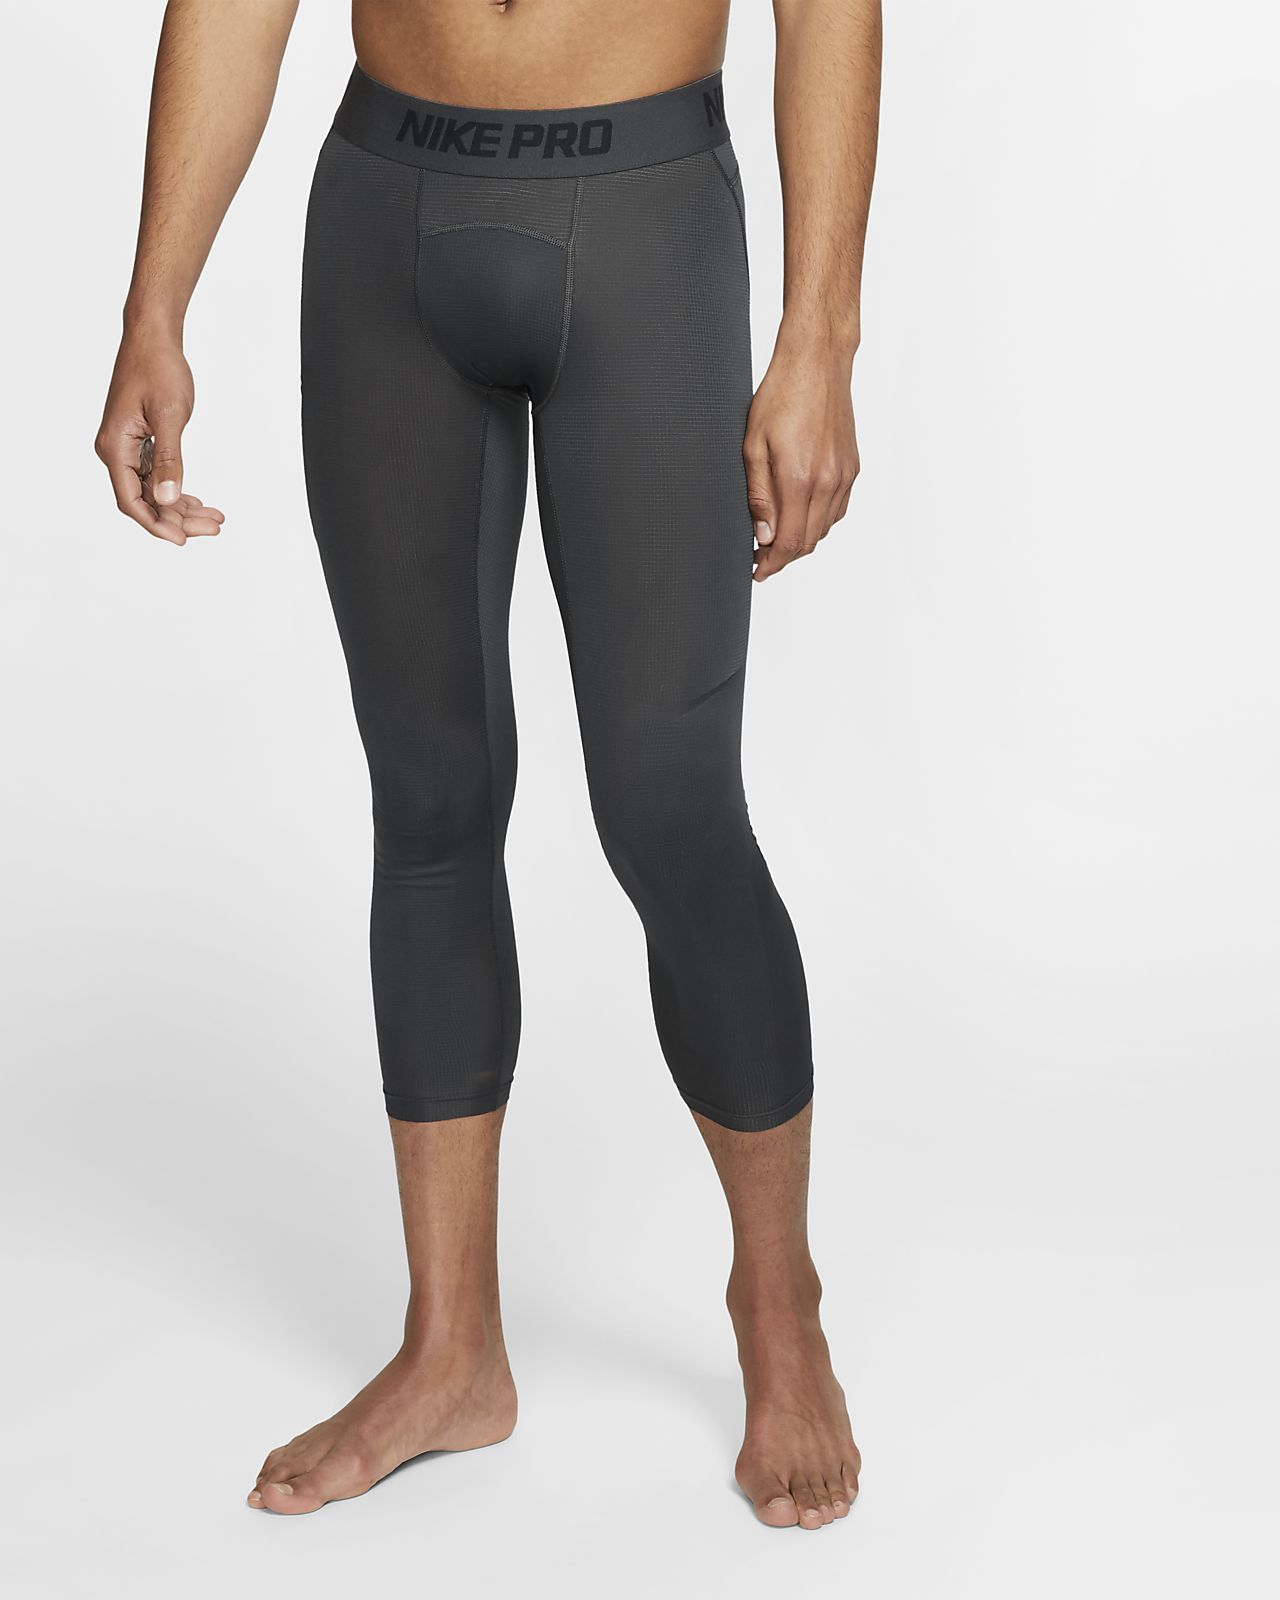 nike pro tights nz \u003e Up to 69% OFF 